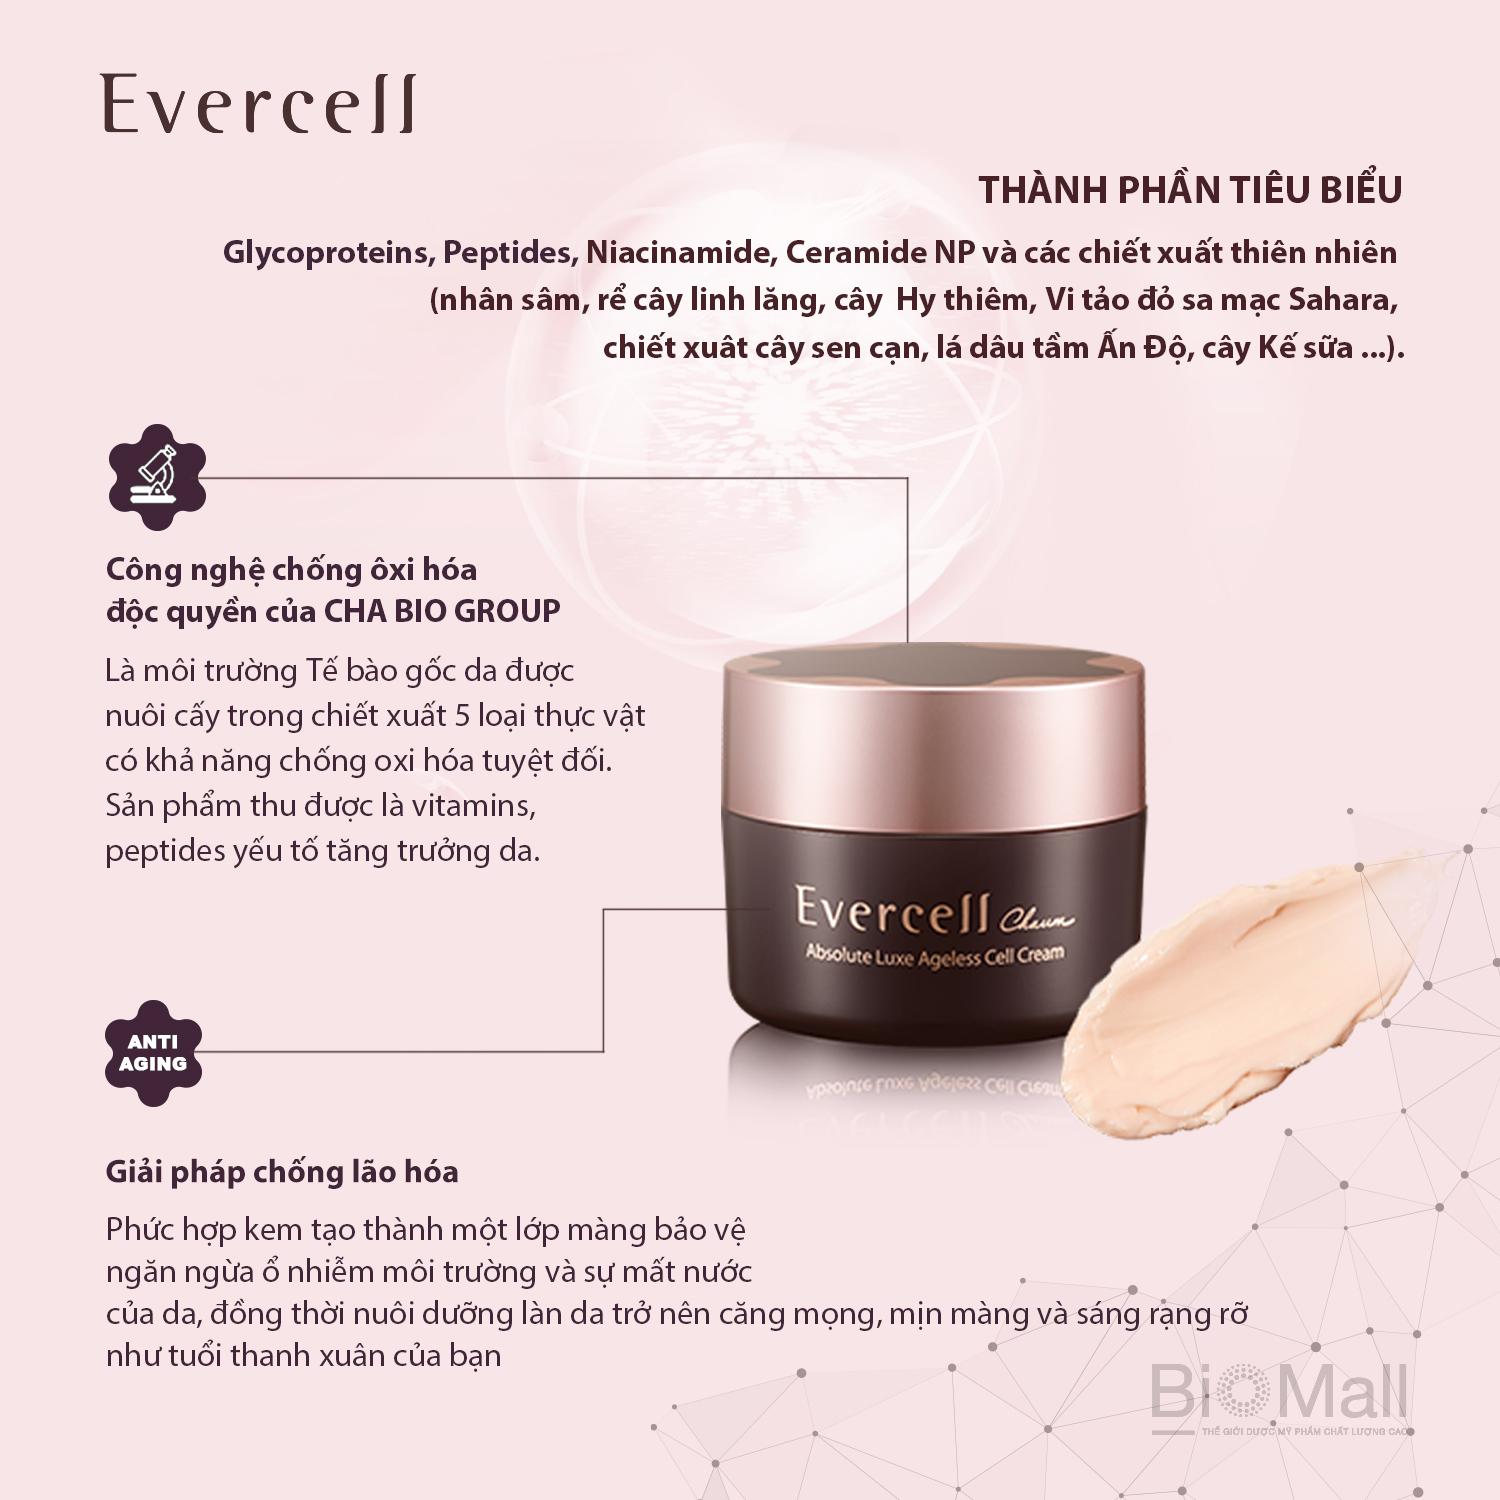 Evercell Chaum Absolute Luxe Cell Ageless Cream